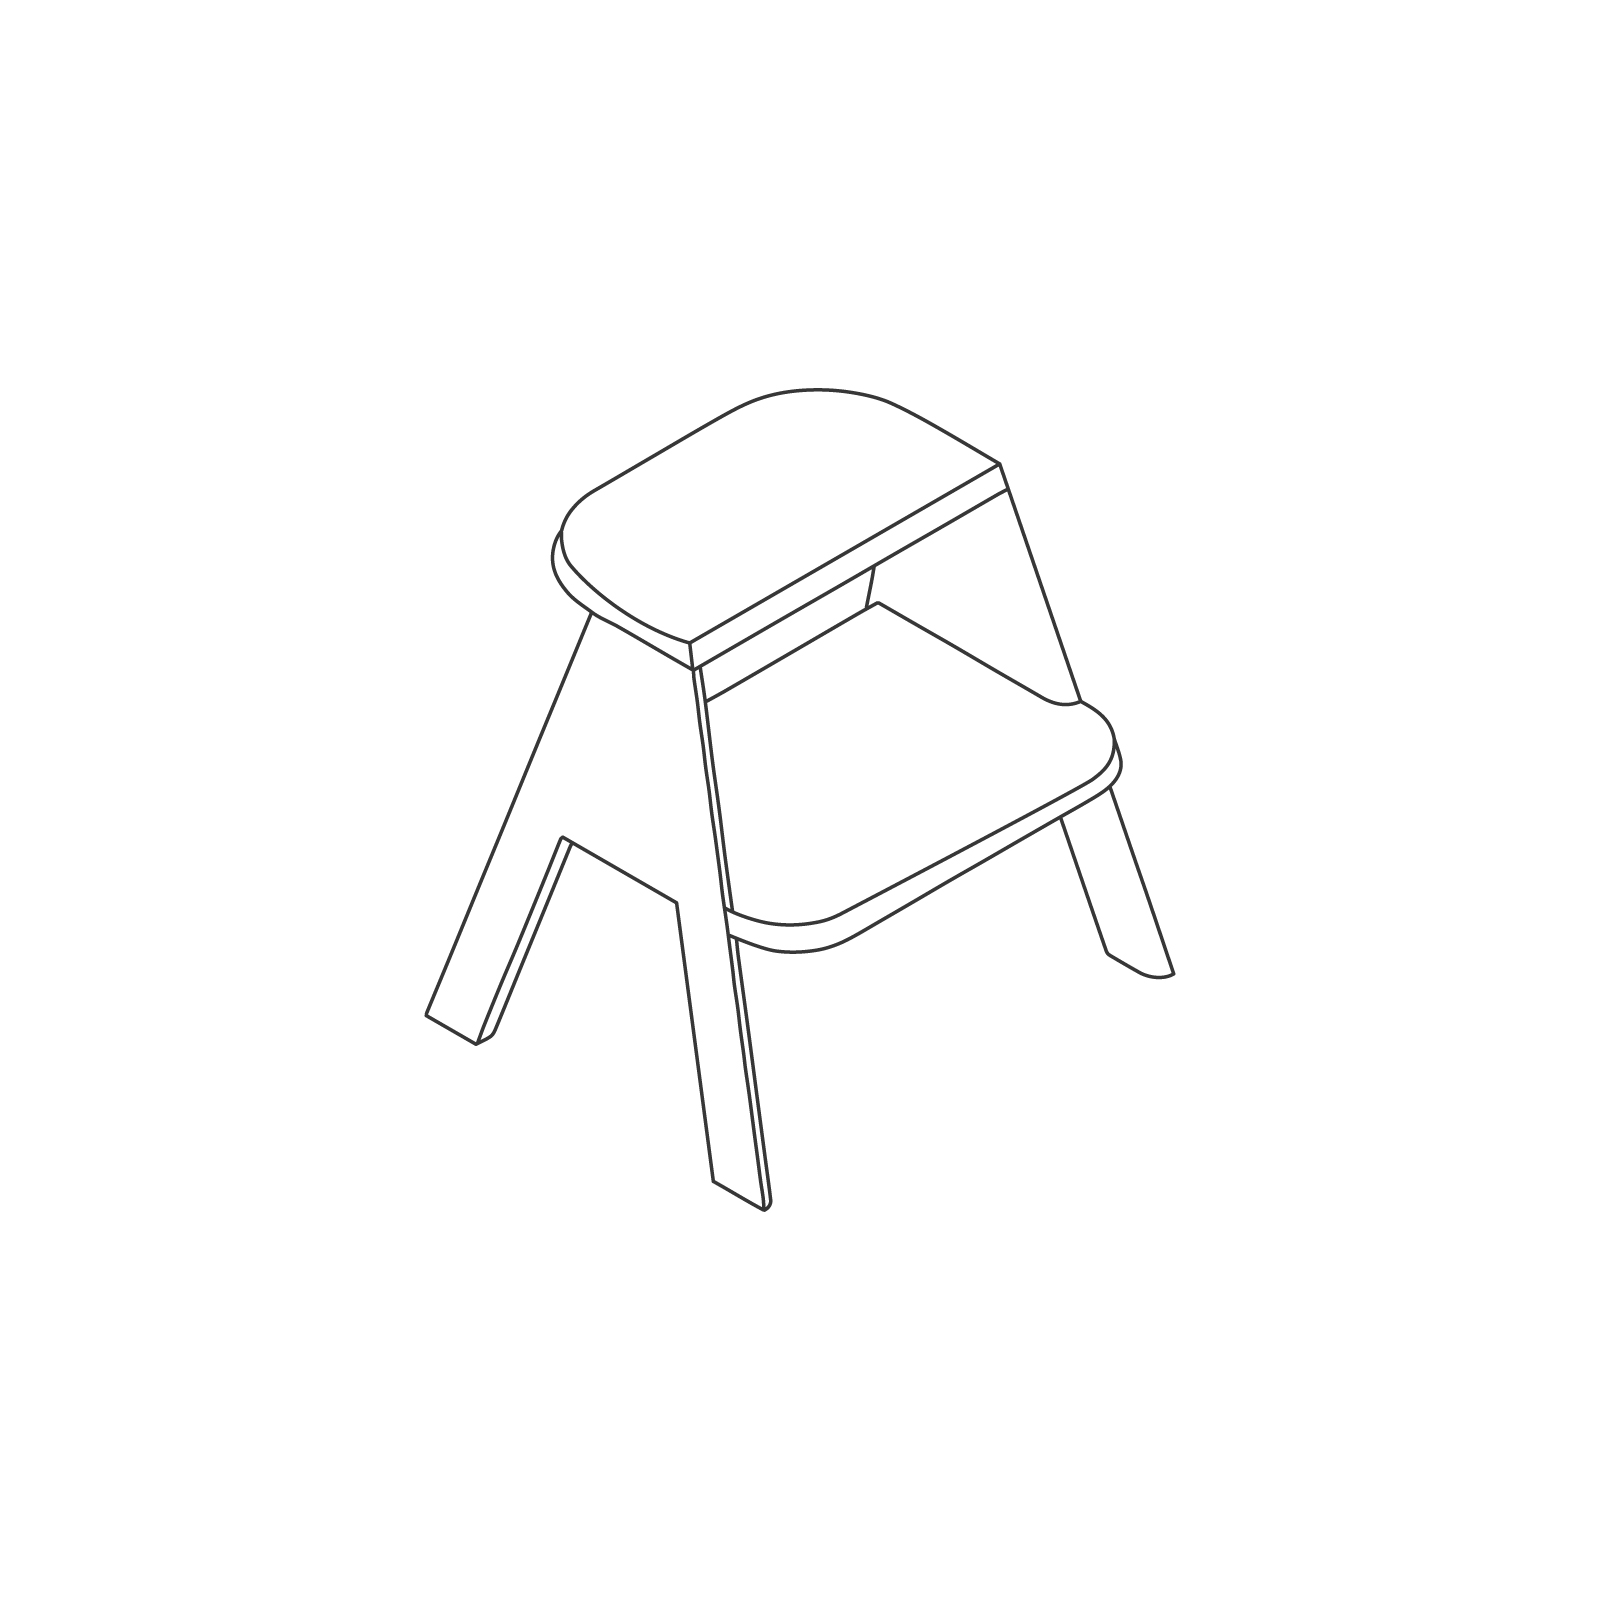 A line drawing - Butler Step Stool